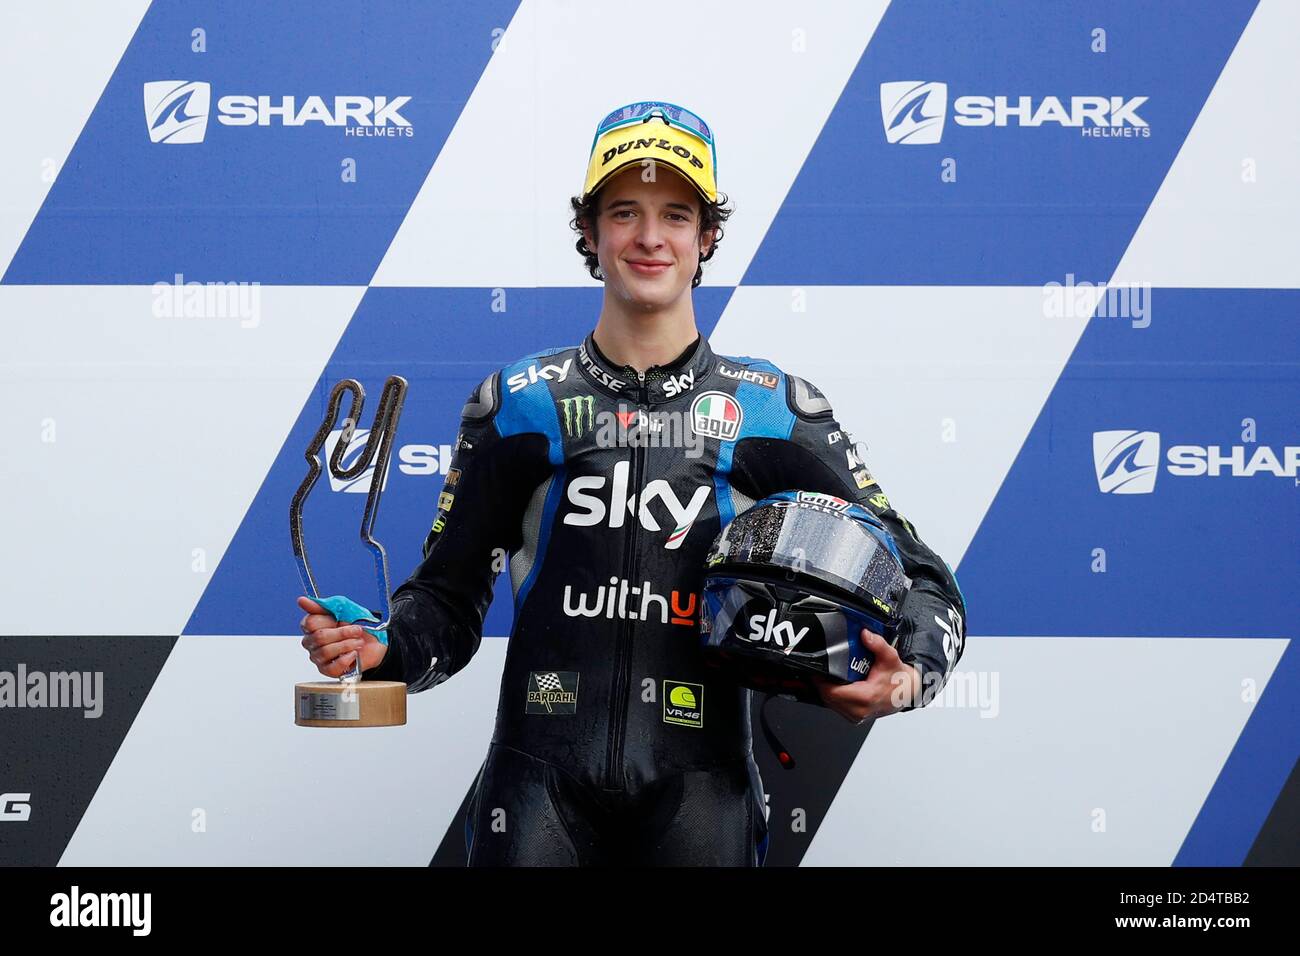 MotoGP - French Grand Prix - Circuit Bugatti, Le Mans, France - October 11,  2020. SKY Racing Team VR46's Celestino Vietti poses with a trophy on the  podium as he celebrates after